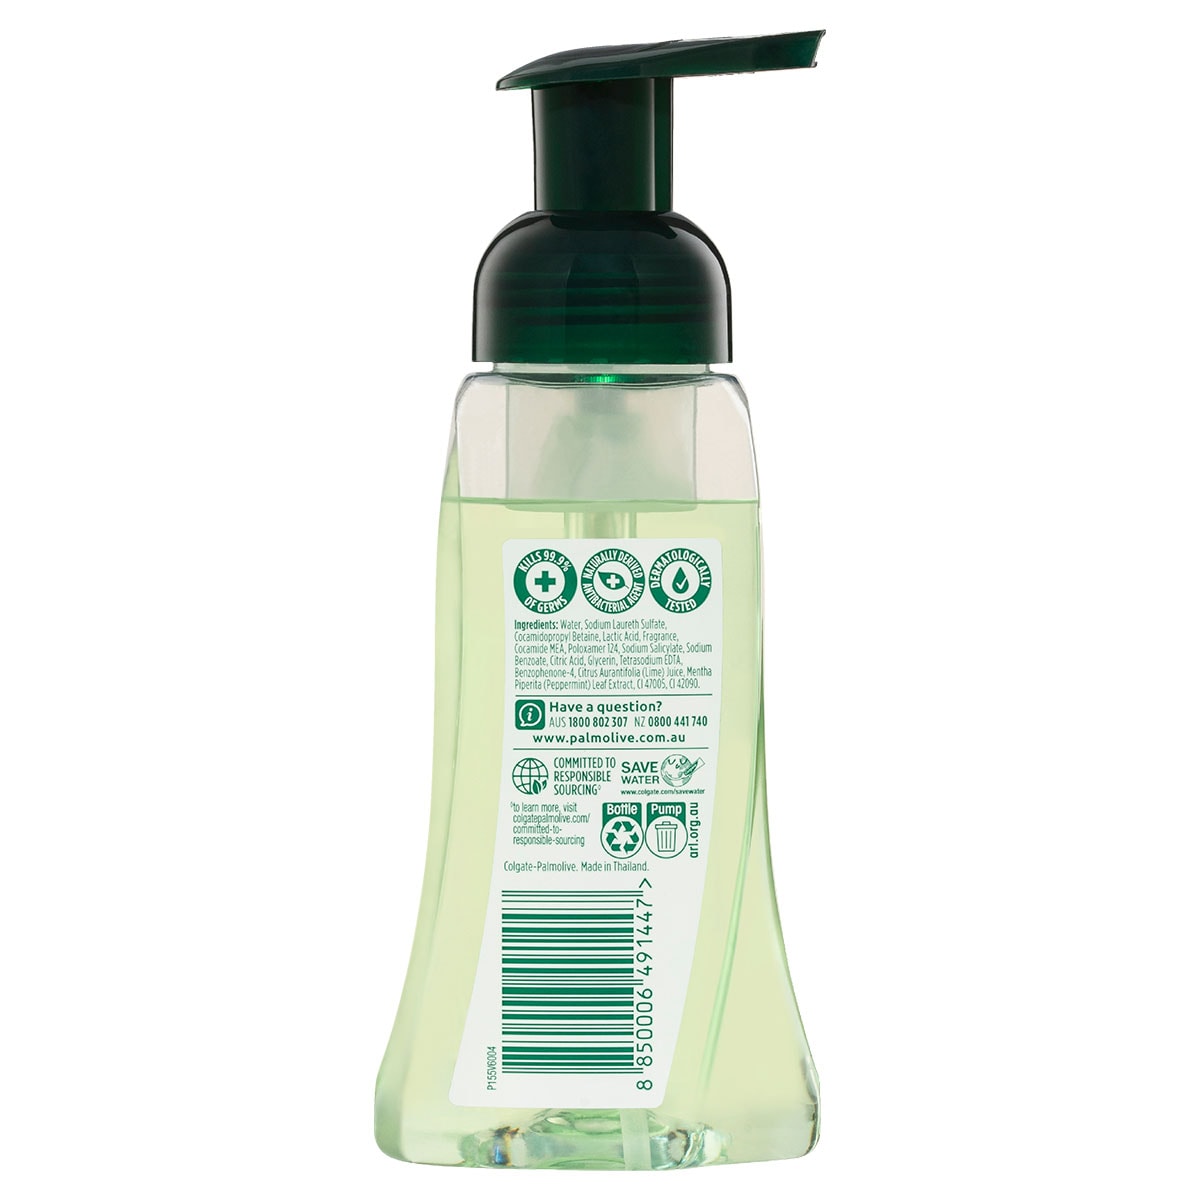 Palmolive Foaming Hand Wash Lime & Mint 250ml